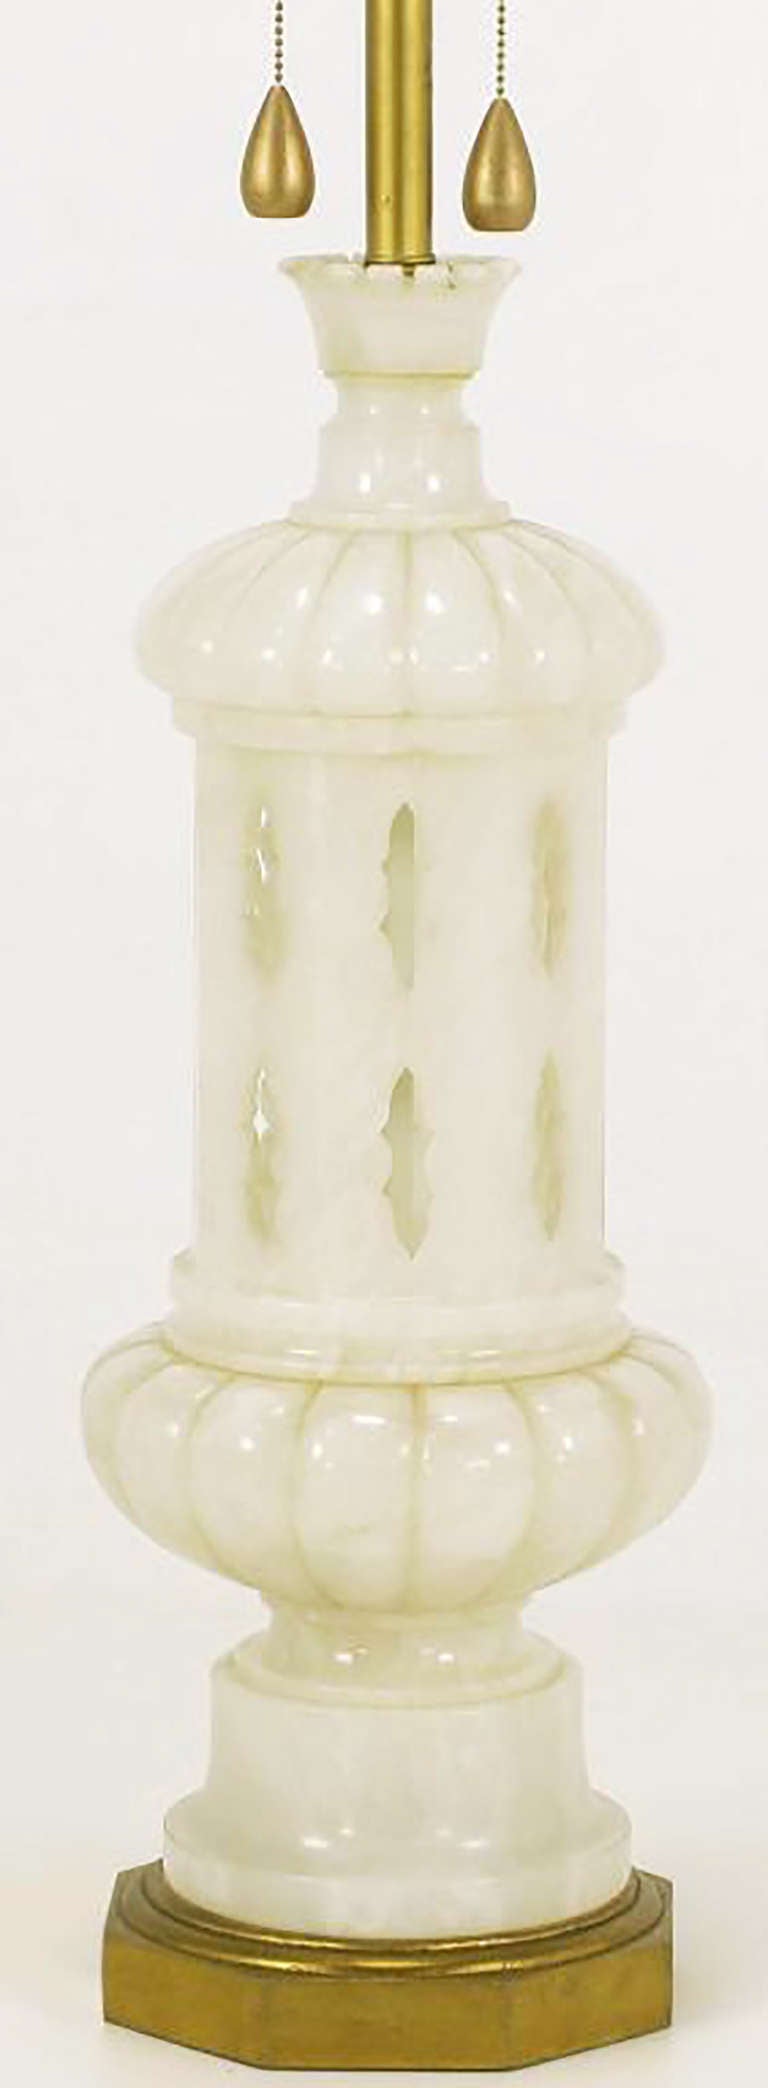 Italian Alabaster Moroccan Design Table Lamp In Excellent Condition For Sale In Chicago, IL